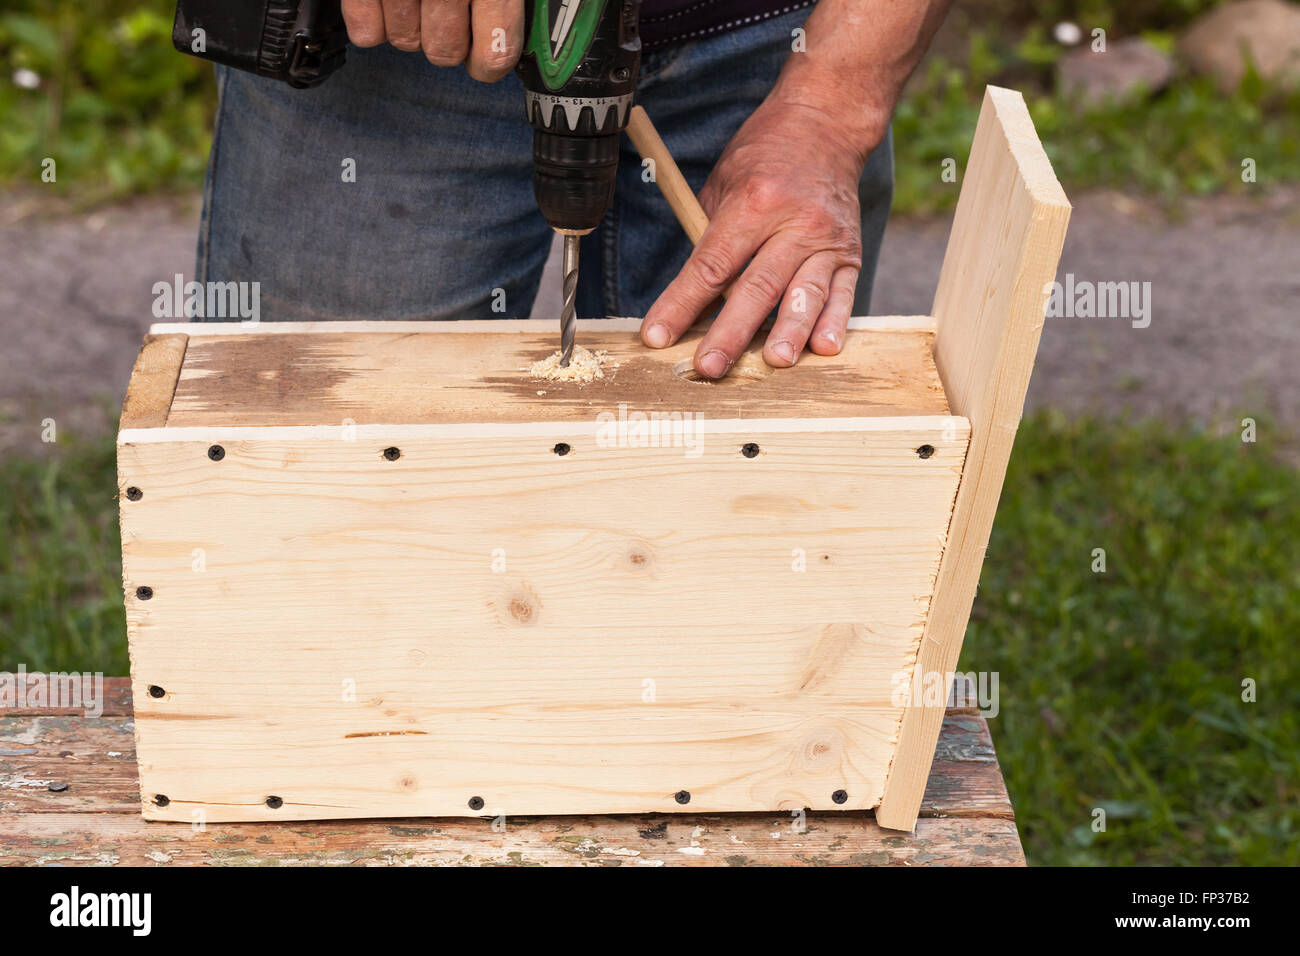 Wooden birdhouse is under construction, carpenter works with drill, close-up photo Stock Photo